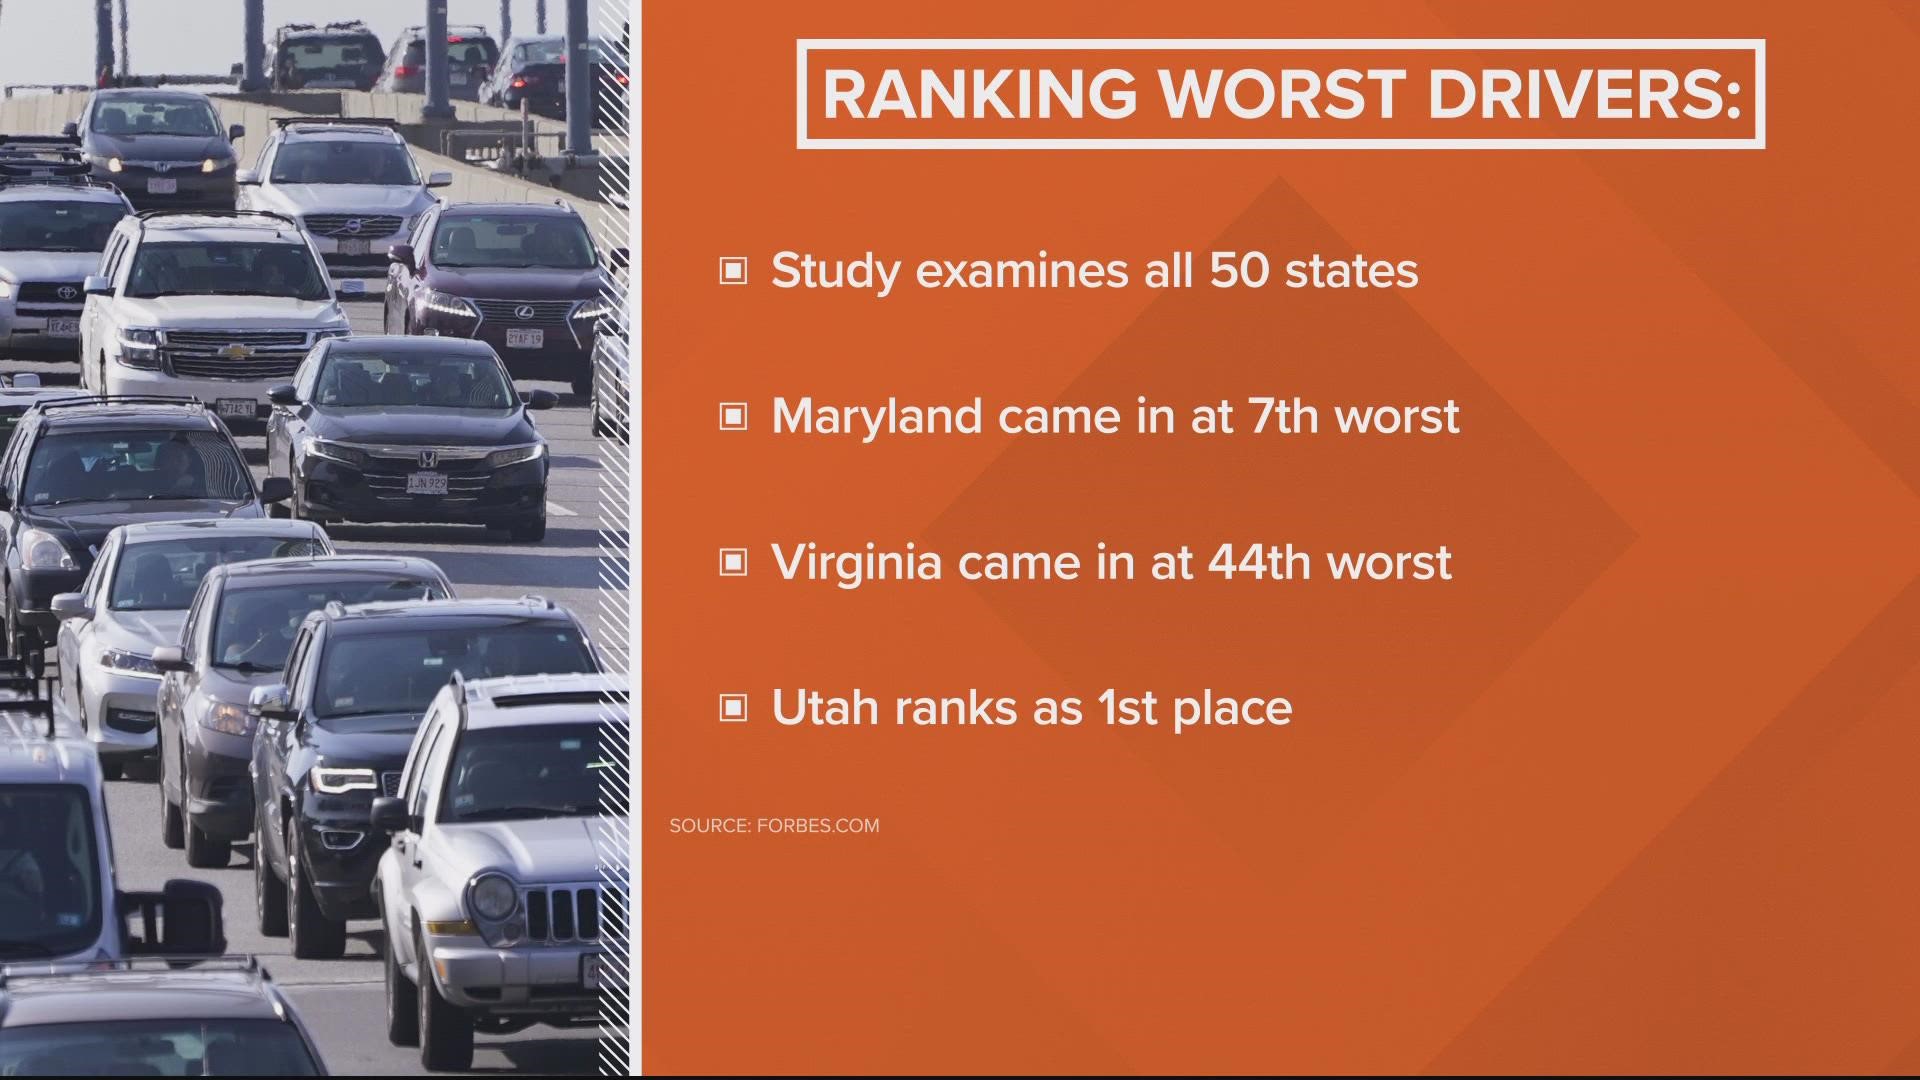 Maryland ranked No. 7 overall. Virginia ranked No. 44. And Utah took the top spot.